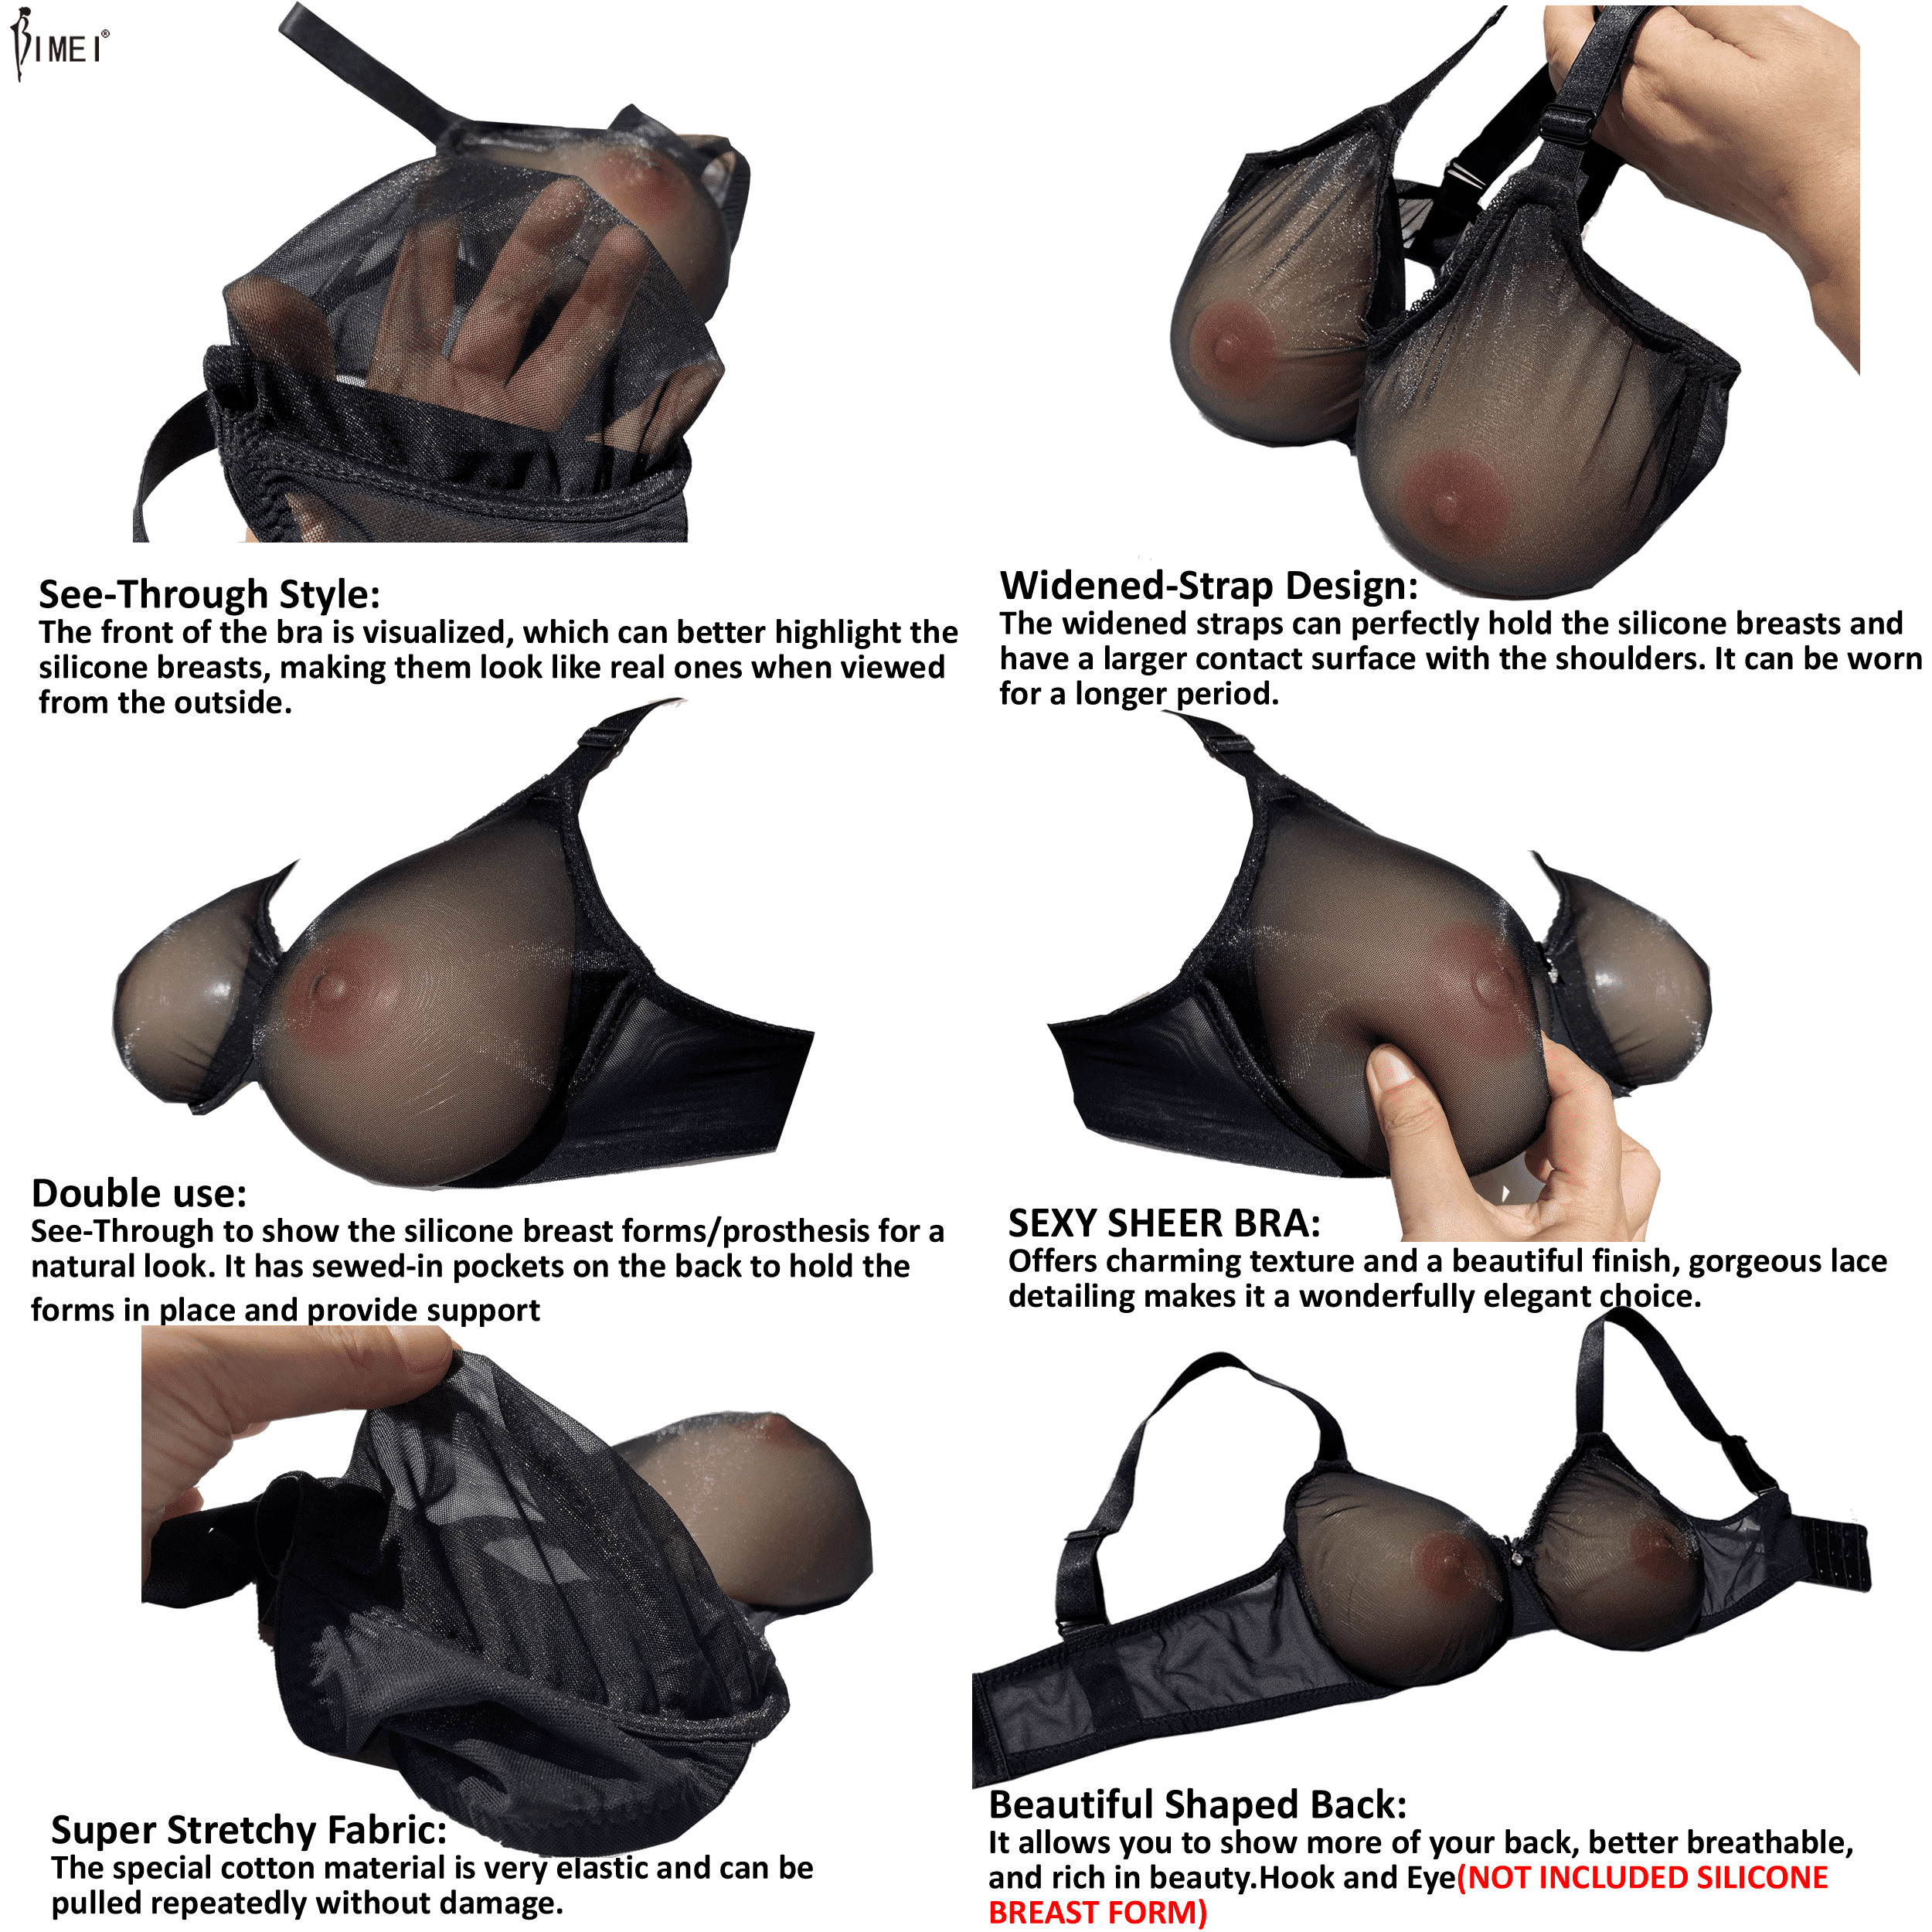 BIMEI See Through Bra CD Lace Mastectomy Lingerie Bra Silicone Breast Forms  Prosthesis Pocket Bra with Steel Ring 9018,Black,34D